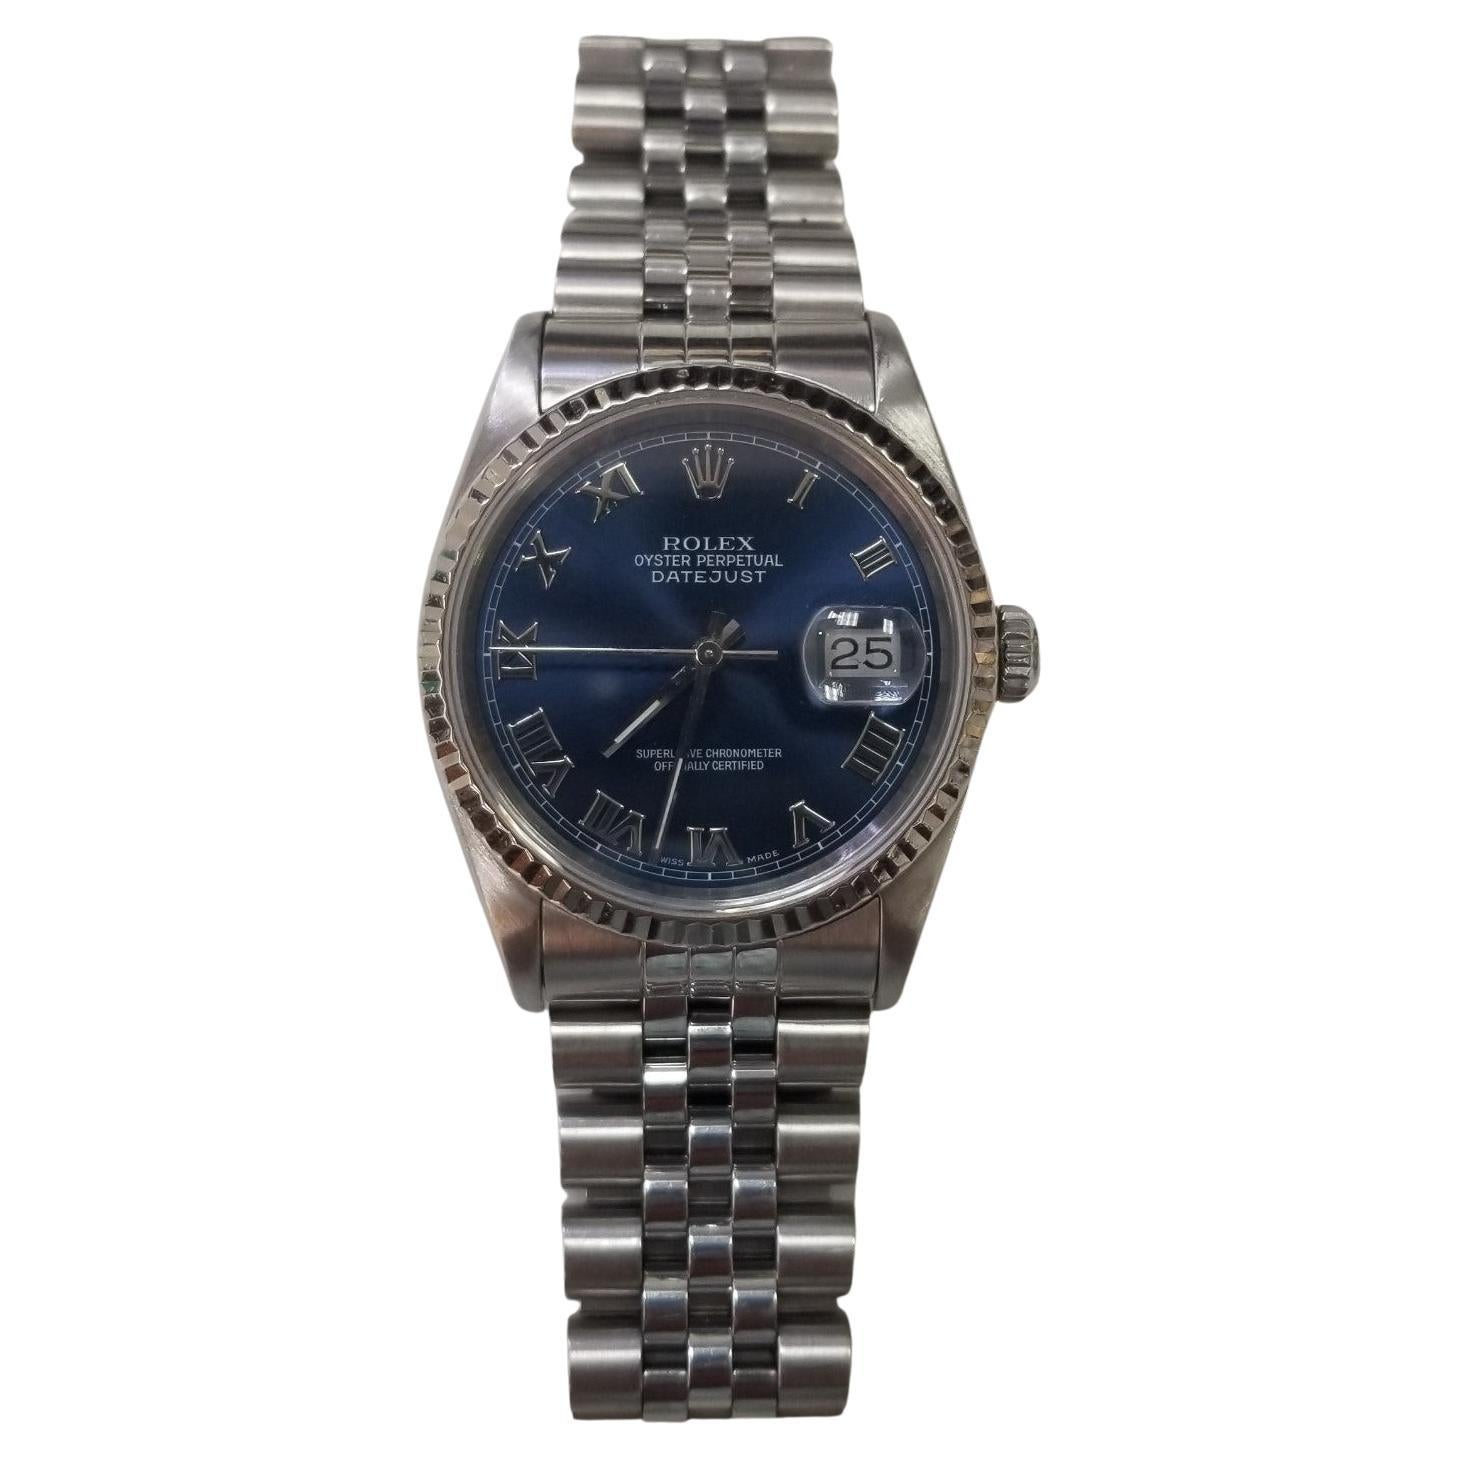 Rolex 34mm Stainless Steel Jubilee Perpetual Datejust With Blue Roman Numerals For Sale